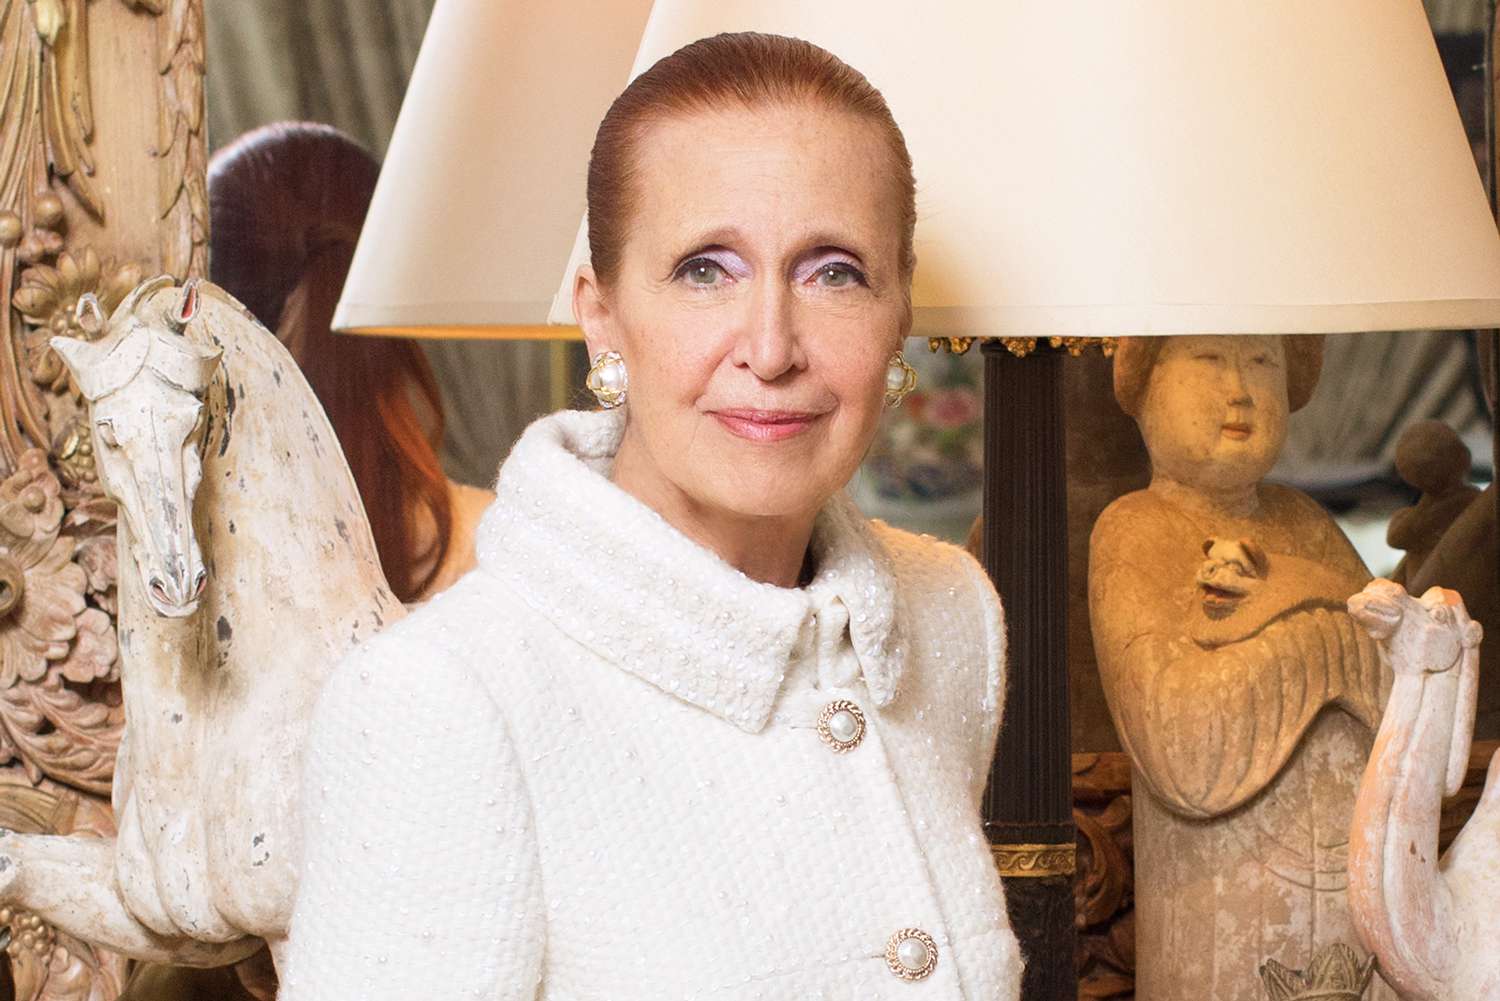 How Danielle Steel Channeled Grief into Helping the Homeless and Mentally Ill (Exclusive) [Video]